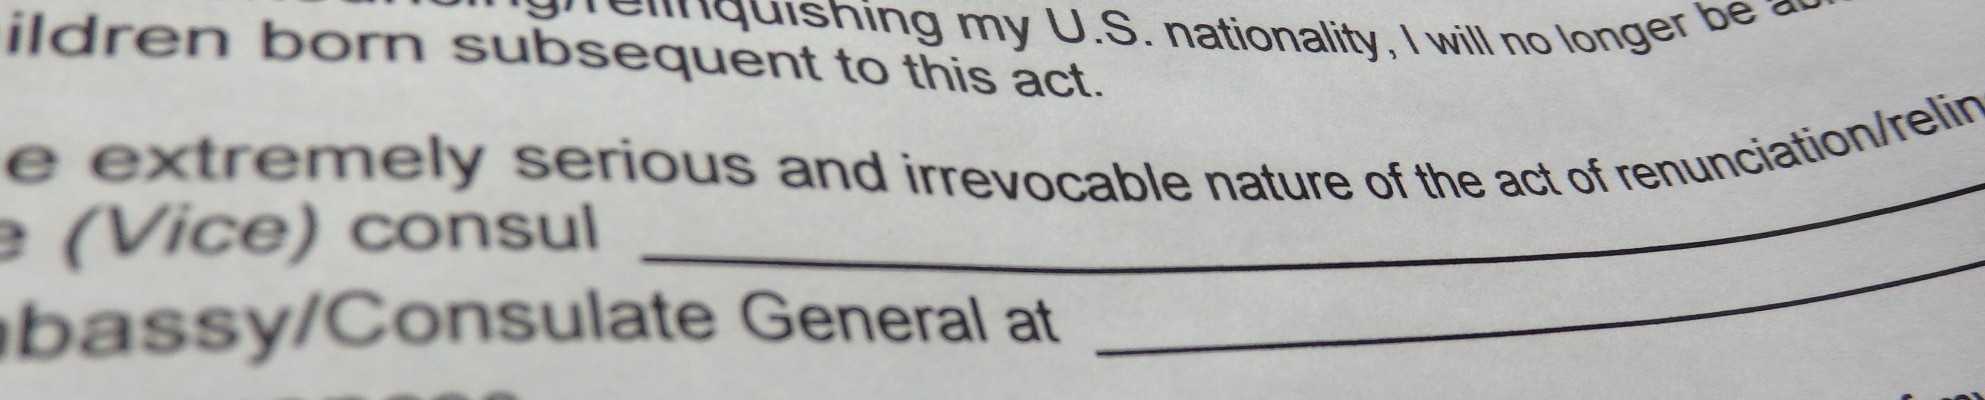 the form I had to sign acknowledging "extremely serious and irrevocable nature of the act of renunciation"